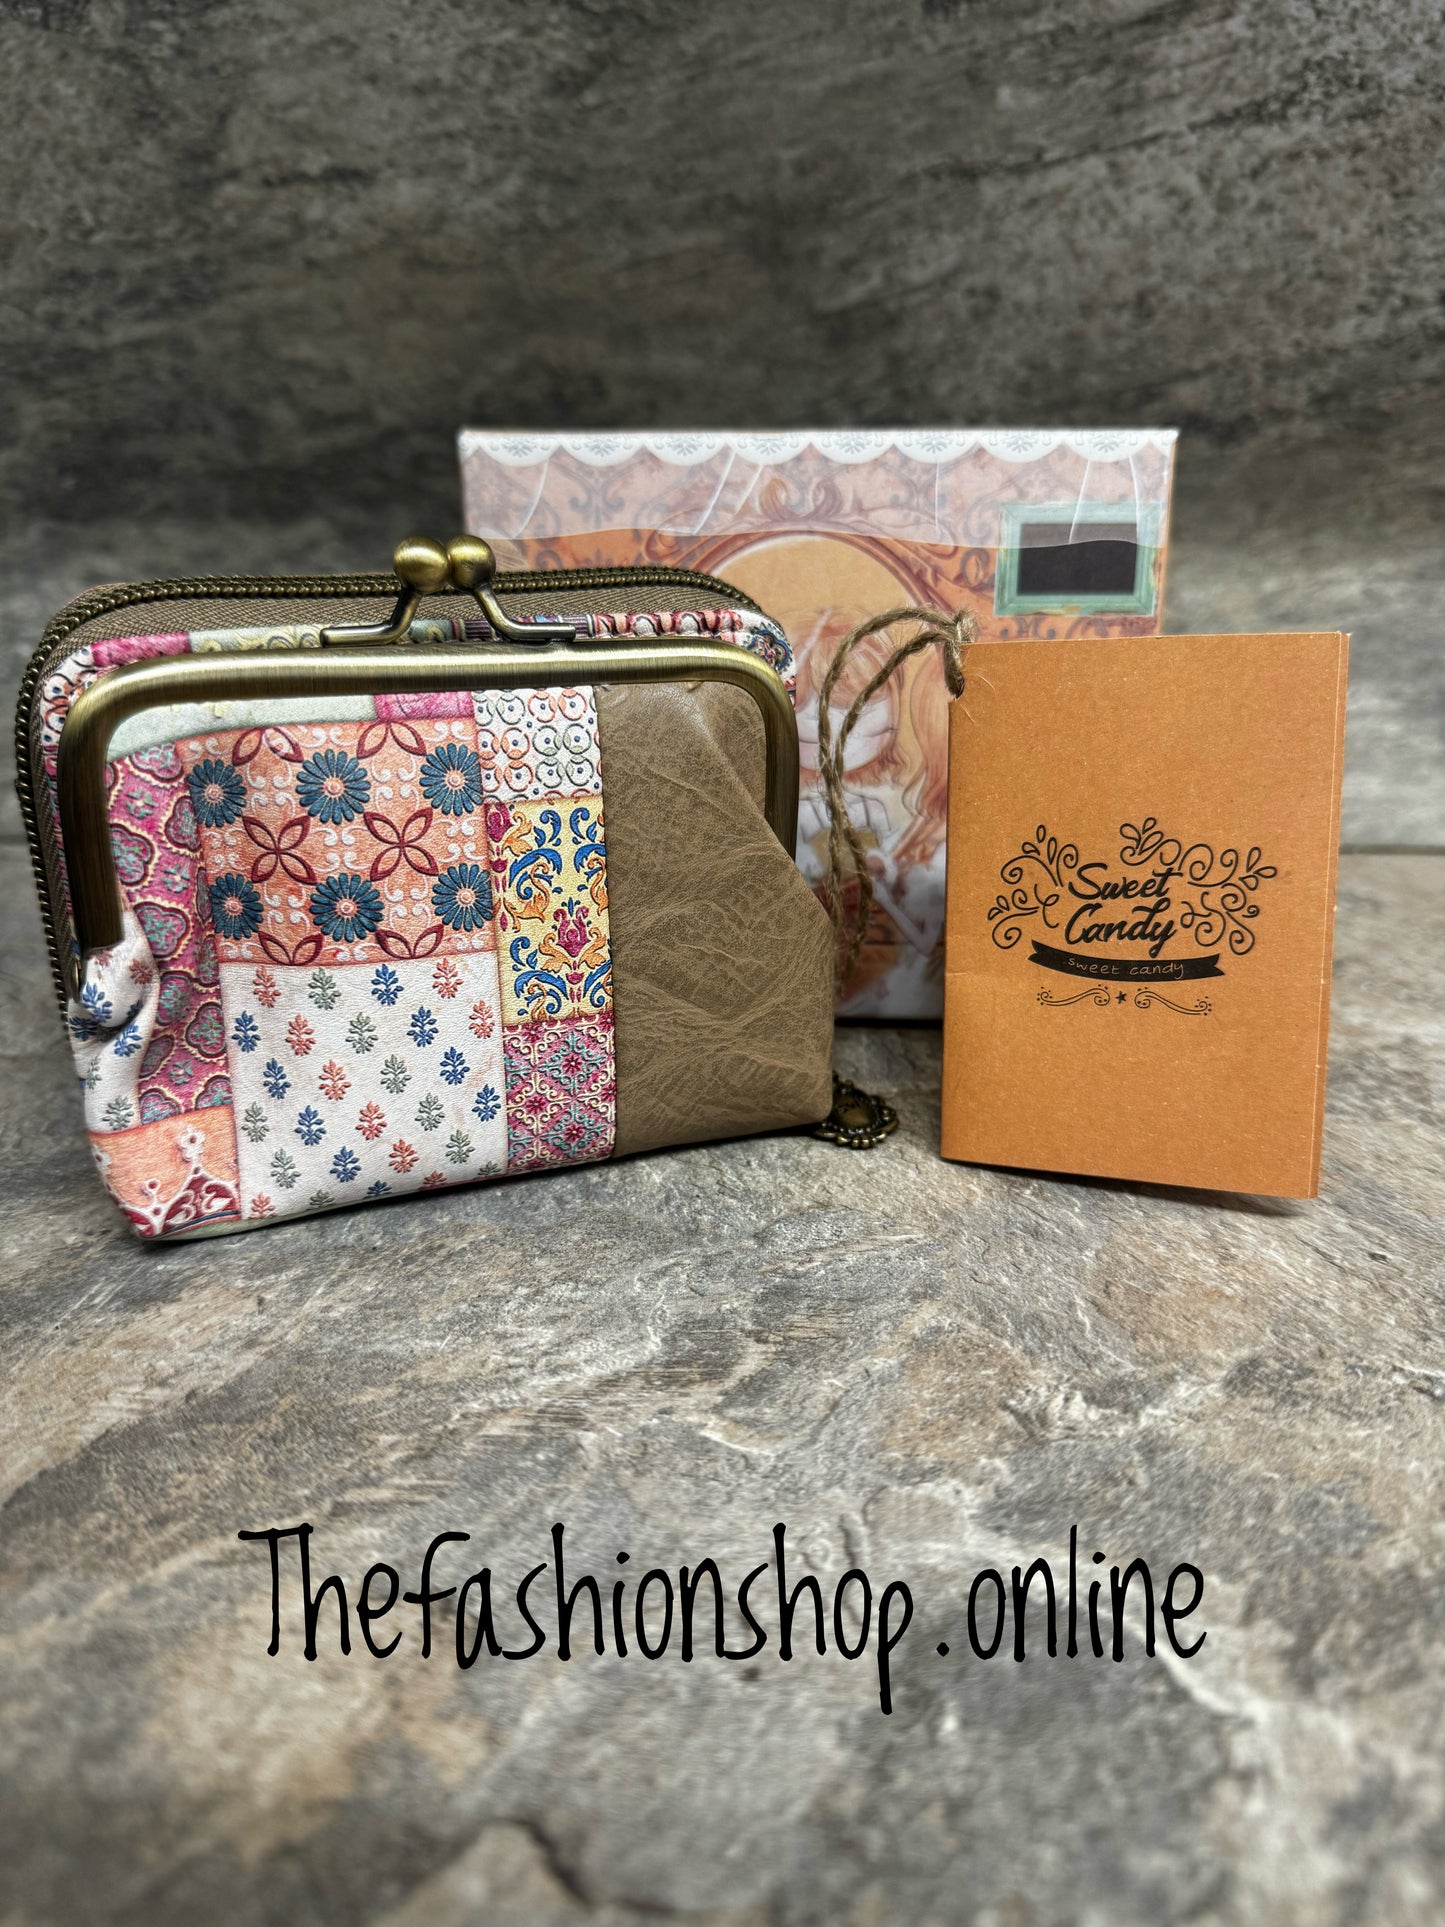 Mocha Sweet and Candy purse